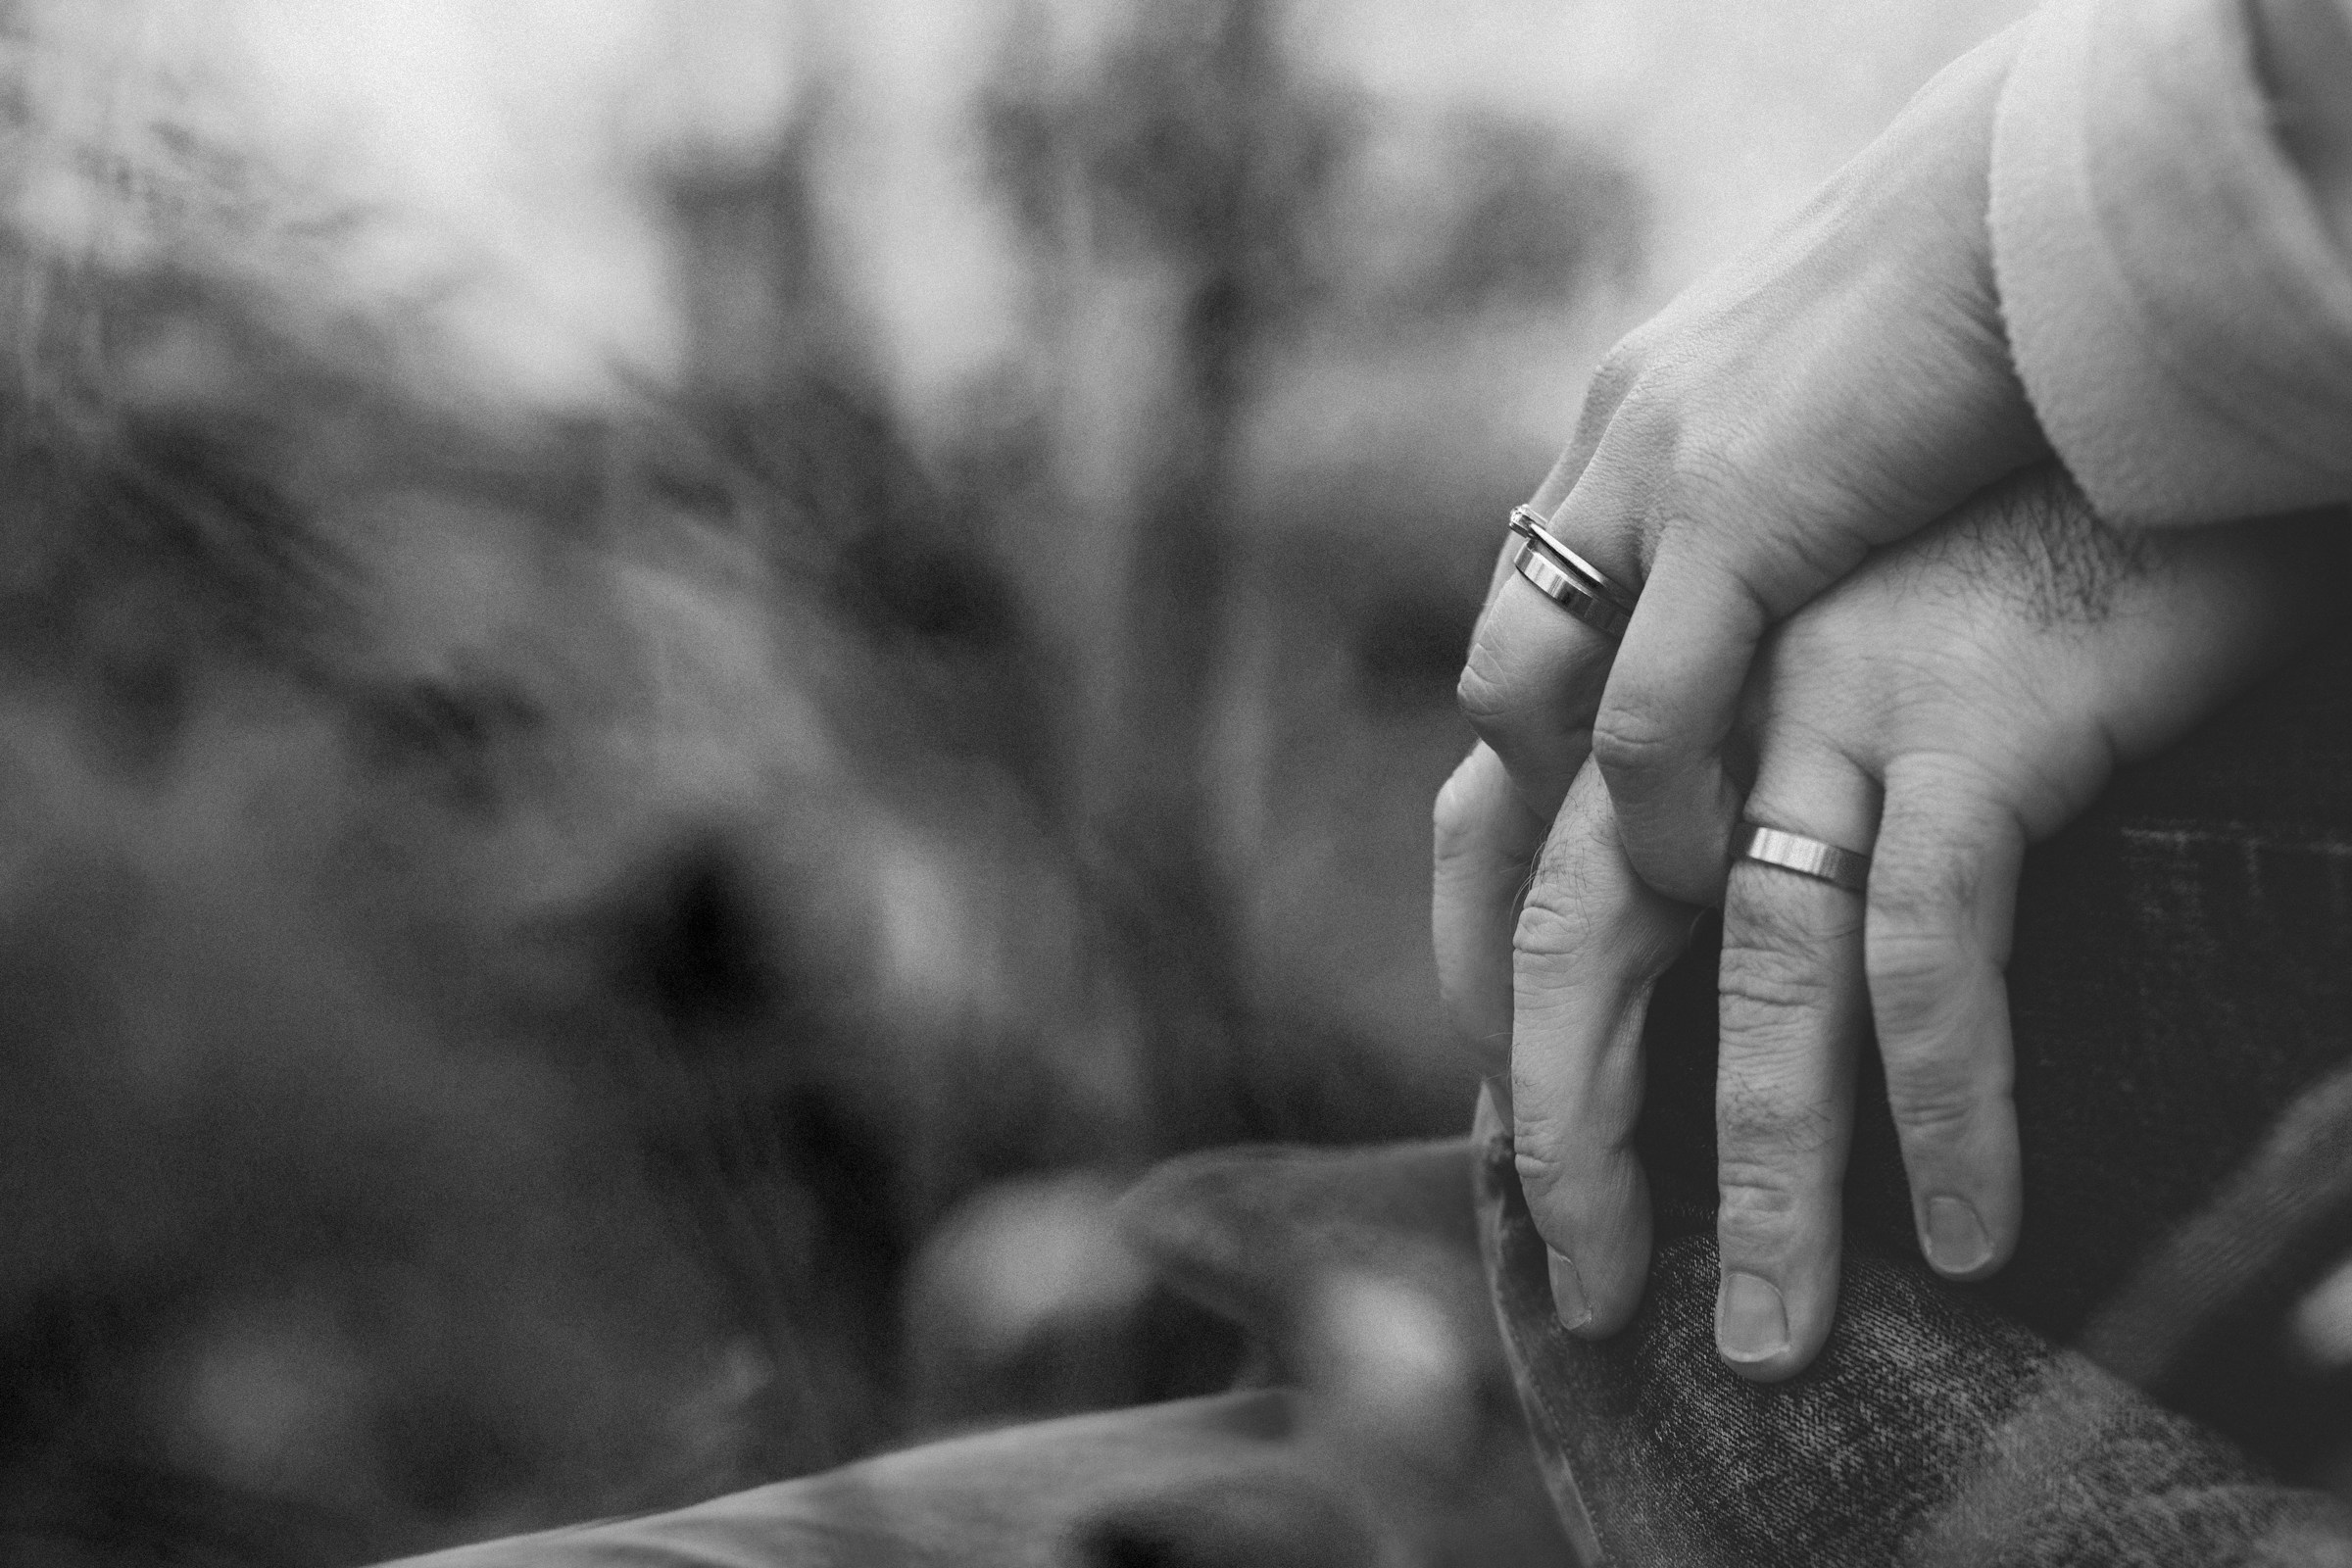 A married couple holding hands | Source: Unsplash